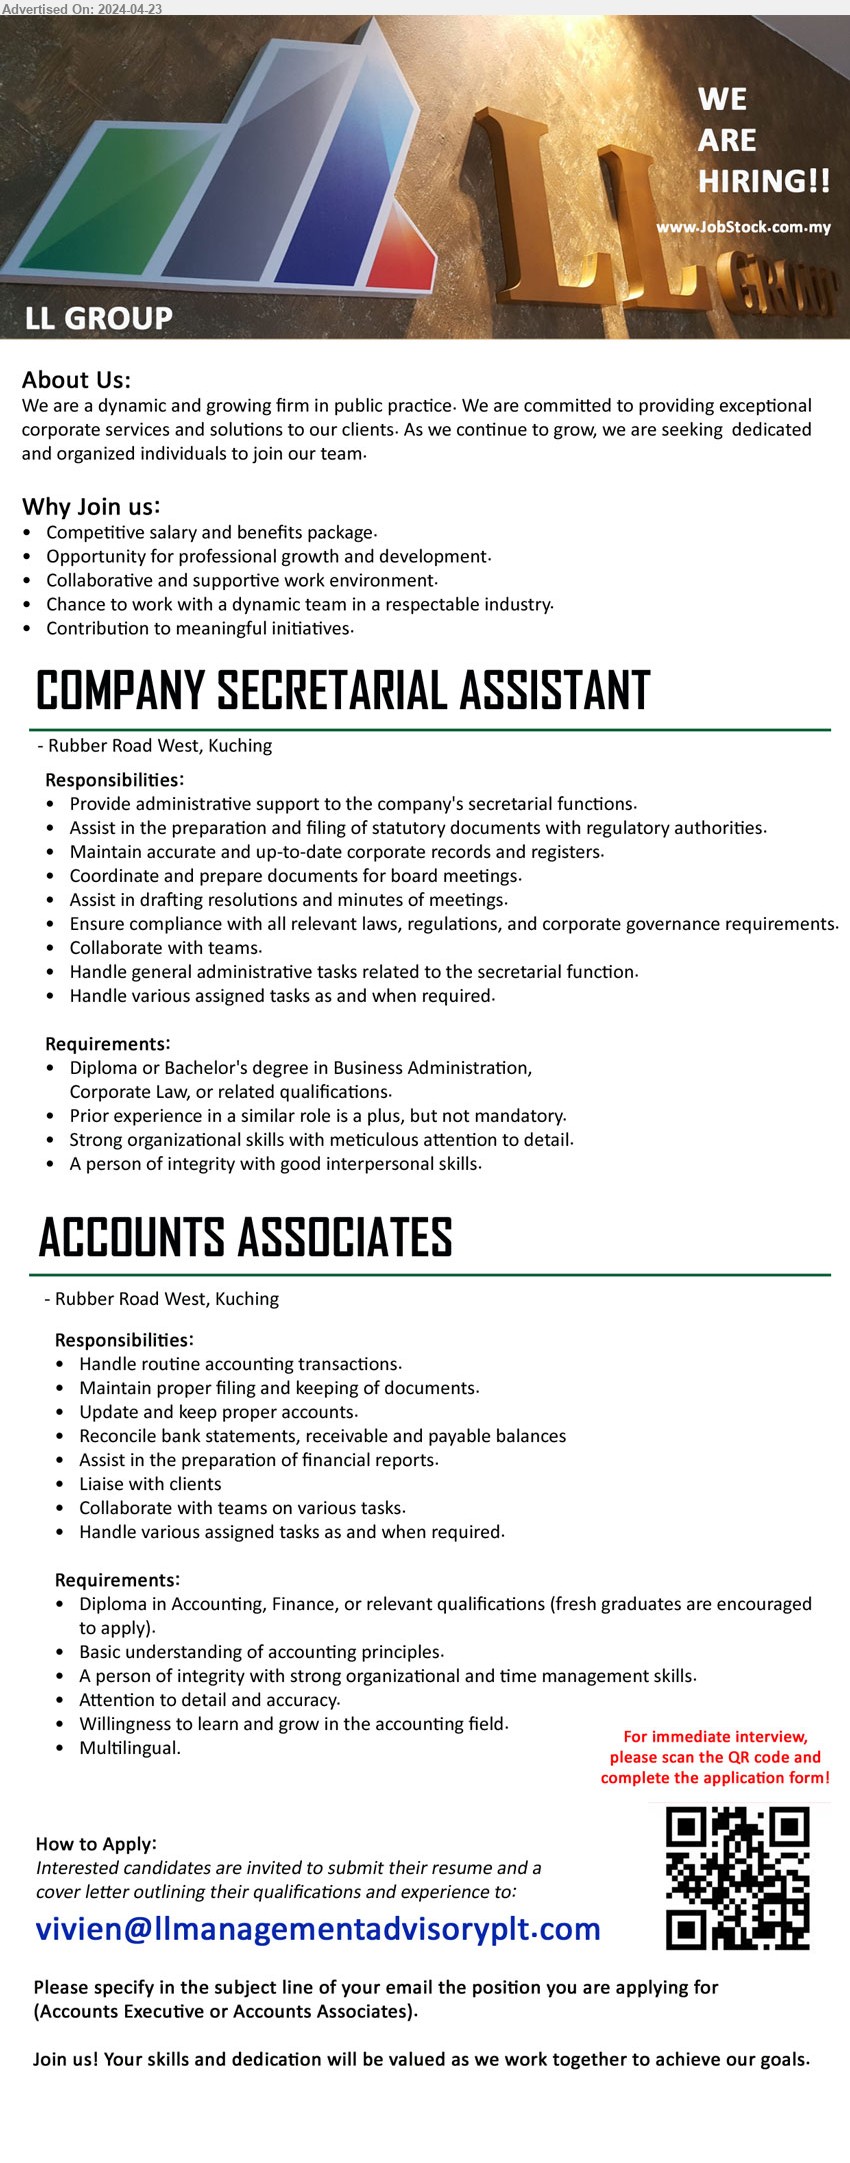 LL GROUP MANAGEMENT ADVISORY SDN BHD - 1. COMPANY SECRETARIAL ASSISTANT (Kuching), Diploma or Bachelor's Degree in Business Administration, Corporate Law, ,...
2. ACCOUNTS ASSOCIATES (Kuching), Diploma in Accounting, Finance, or relevant qualifications (fresh graduates are encouraged to apply).,...
Email resume to ...
